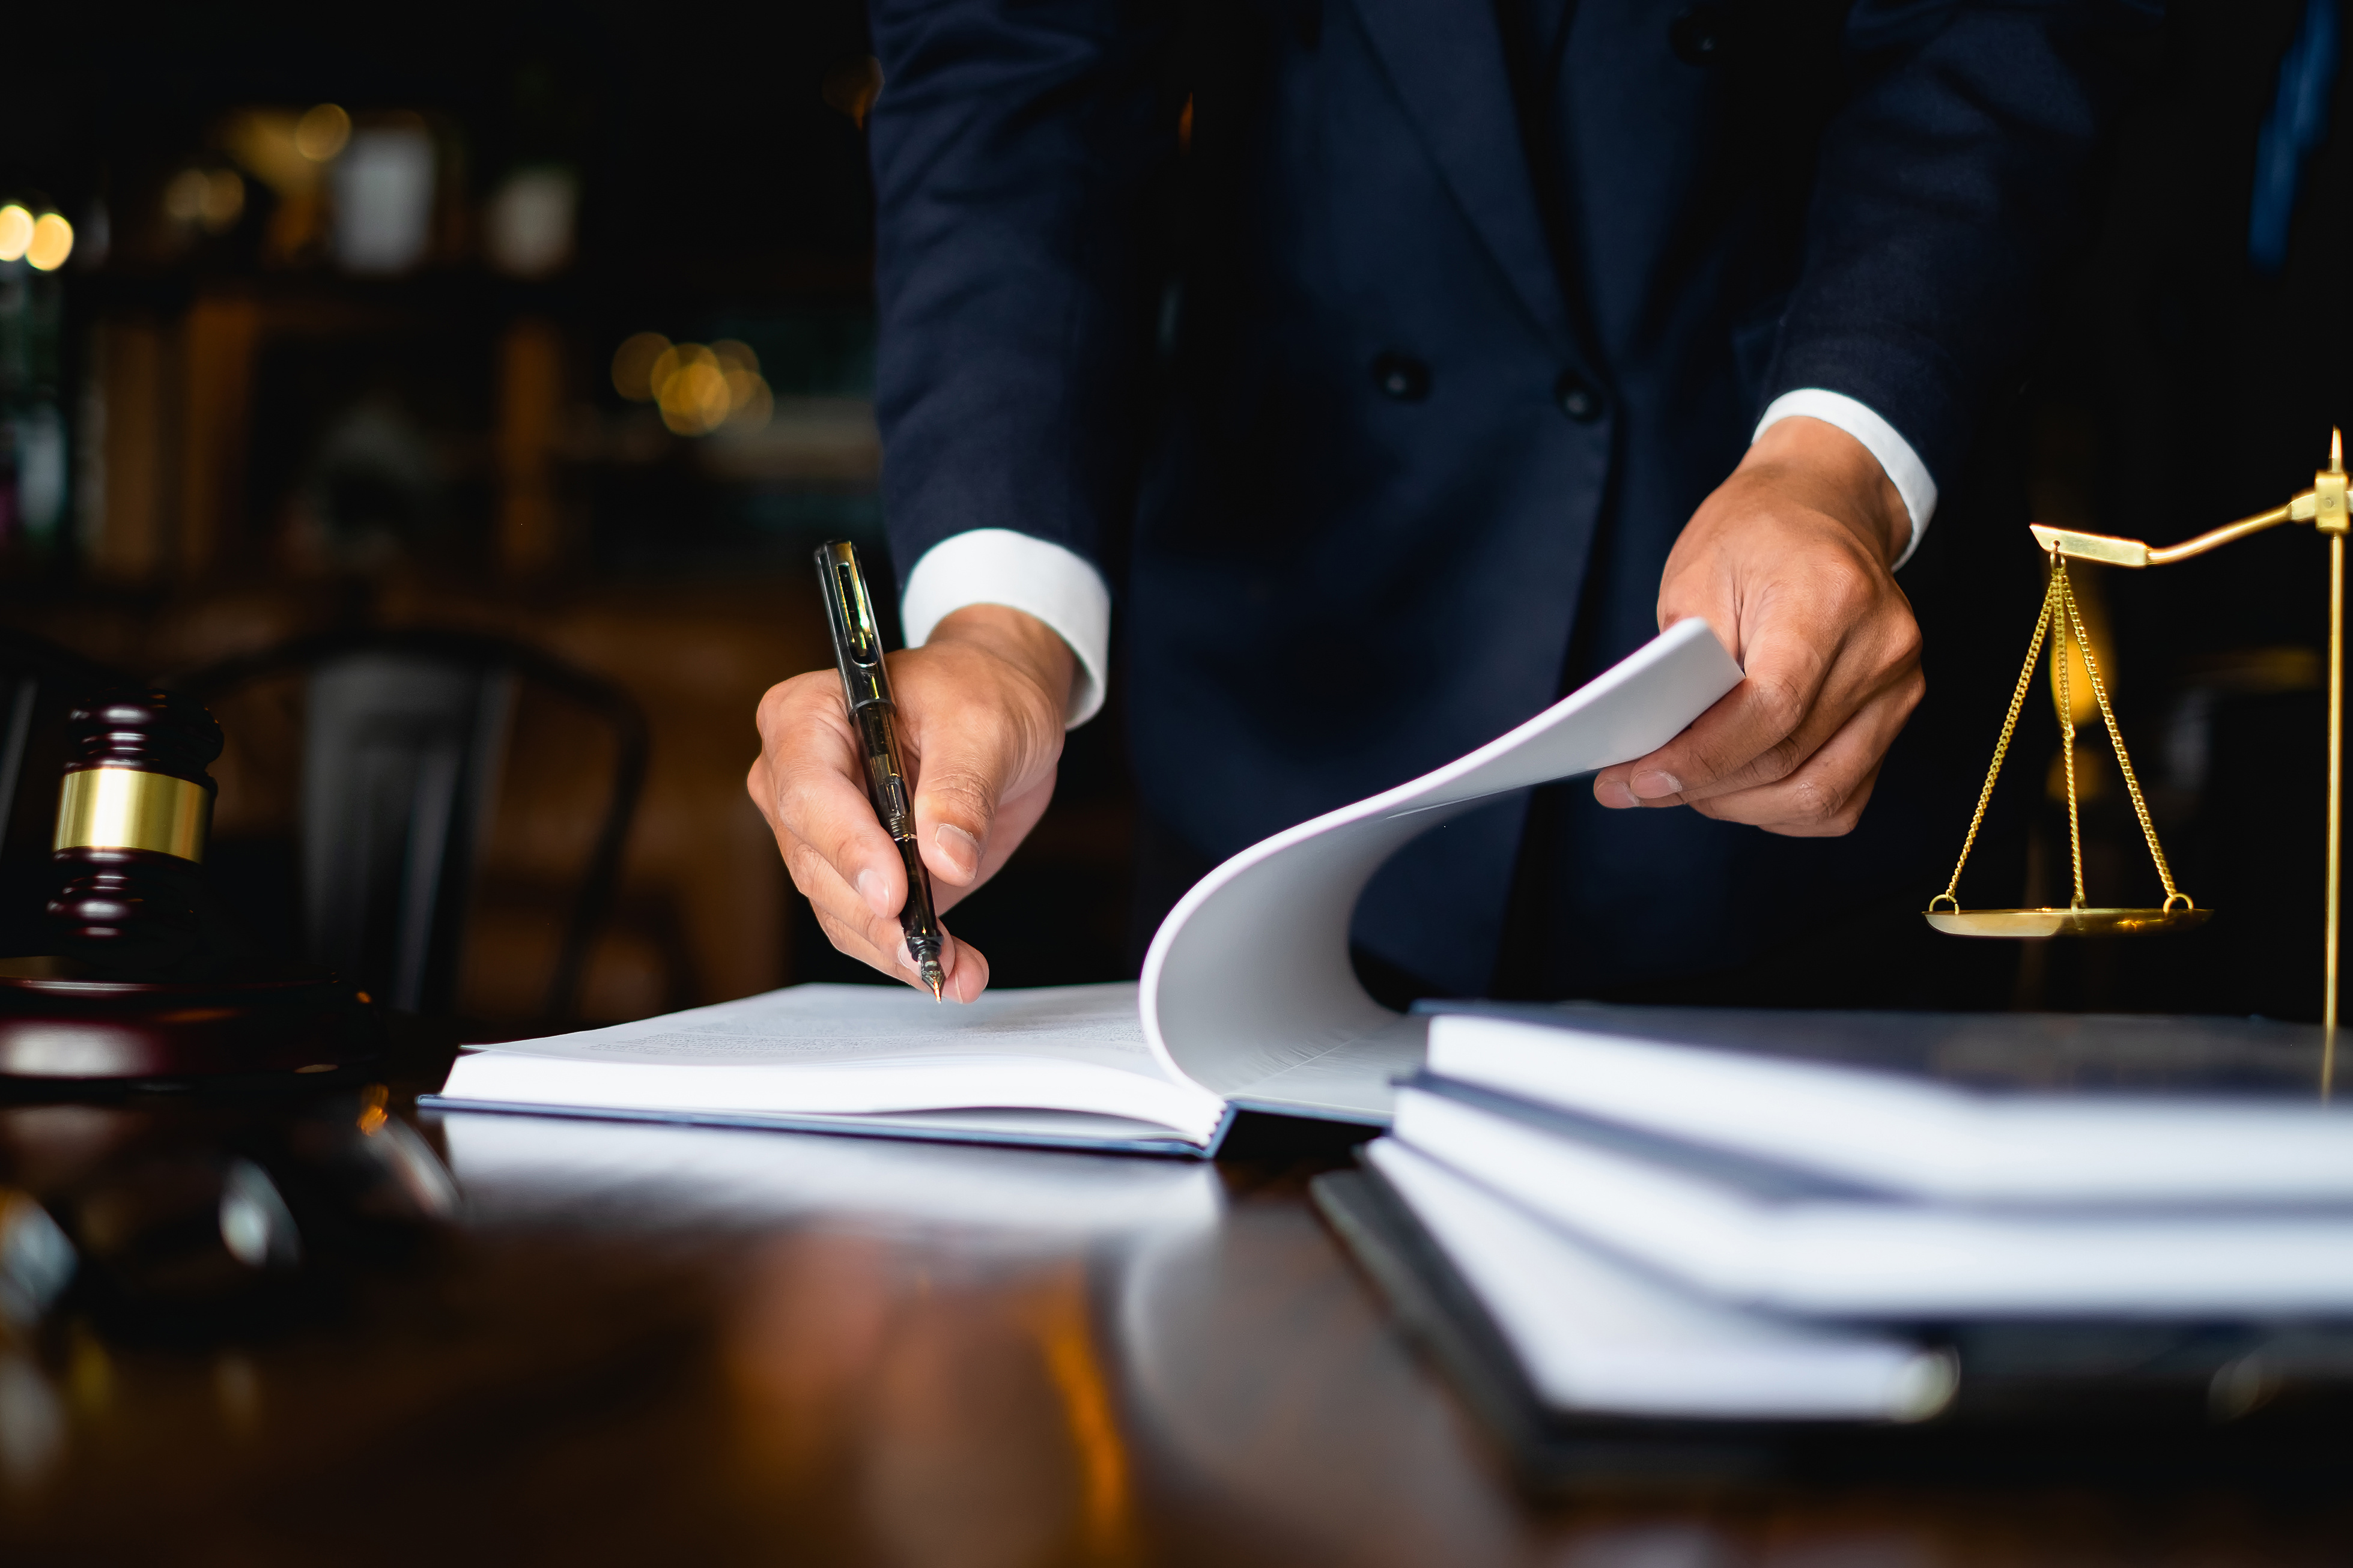 What to look for when hiring an attorney